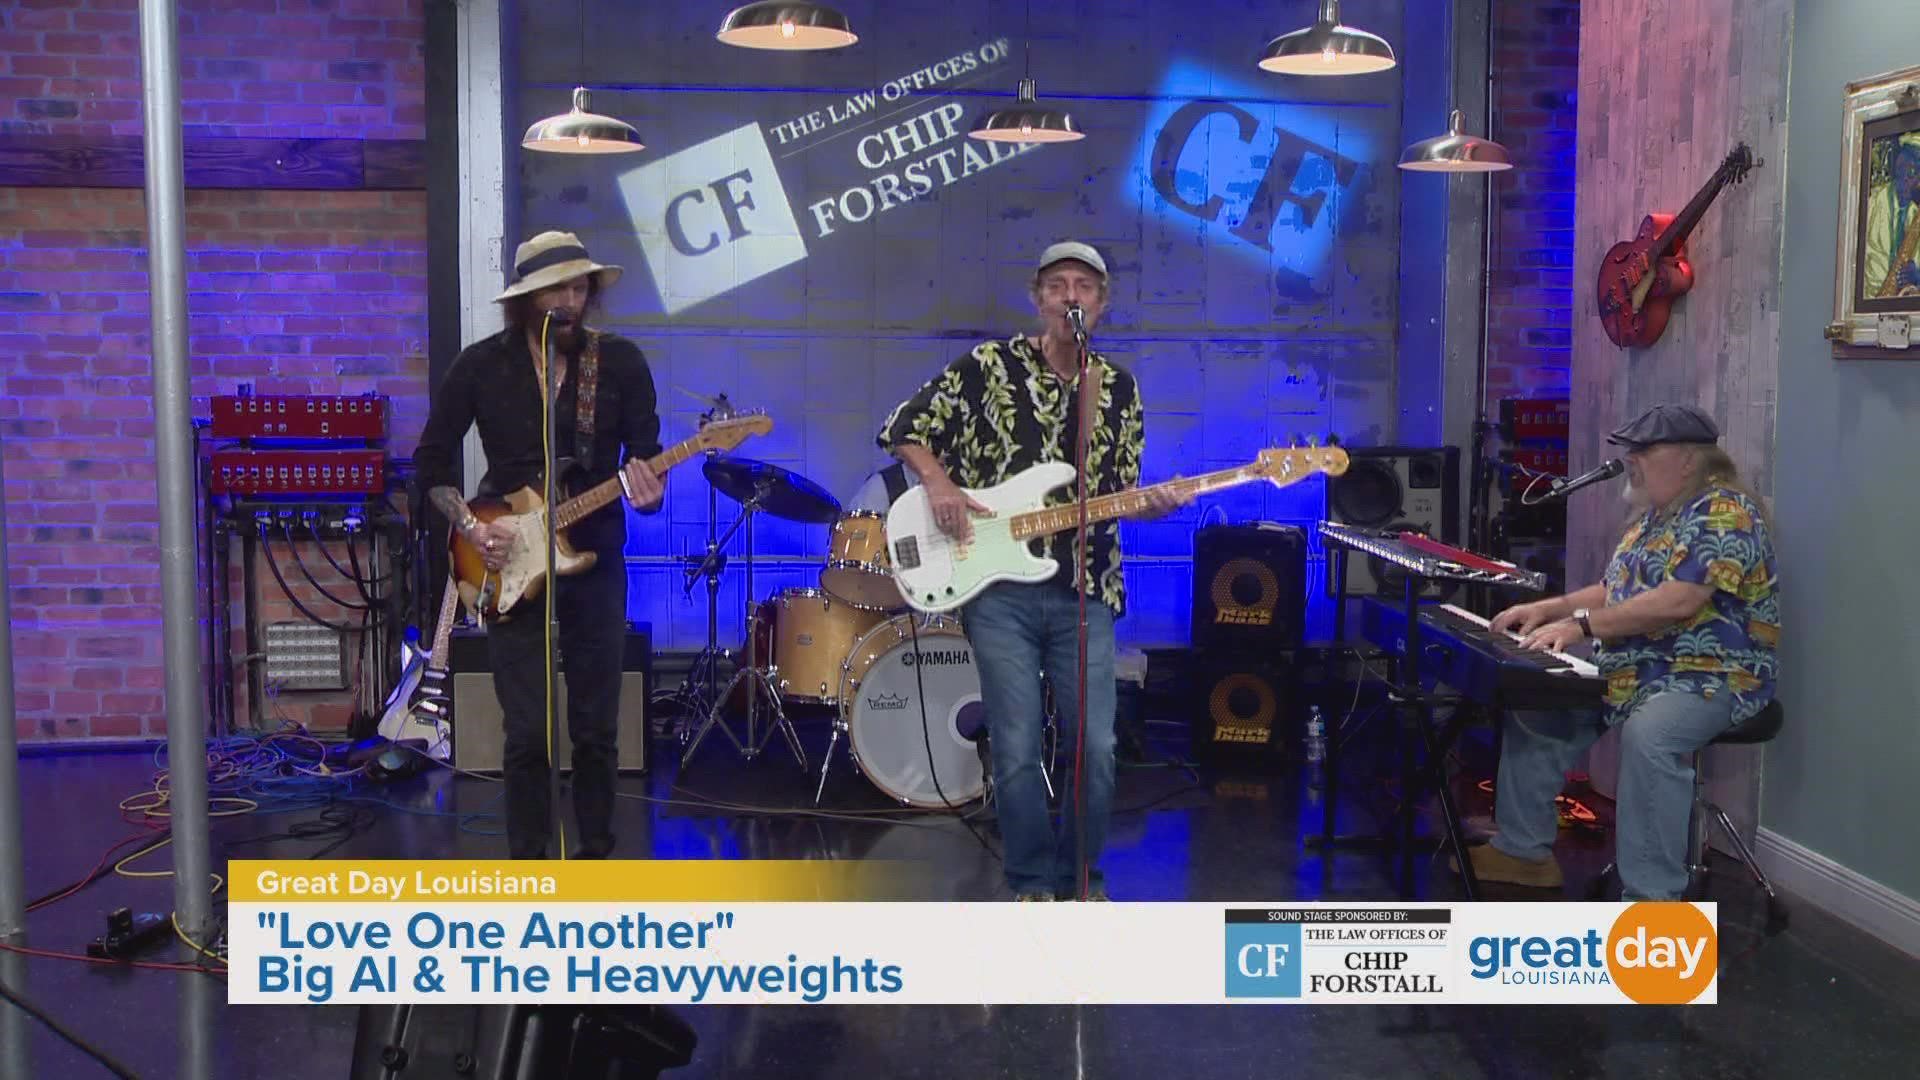 Big Al & The Heavyweights perform a song from their latest album.